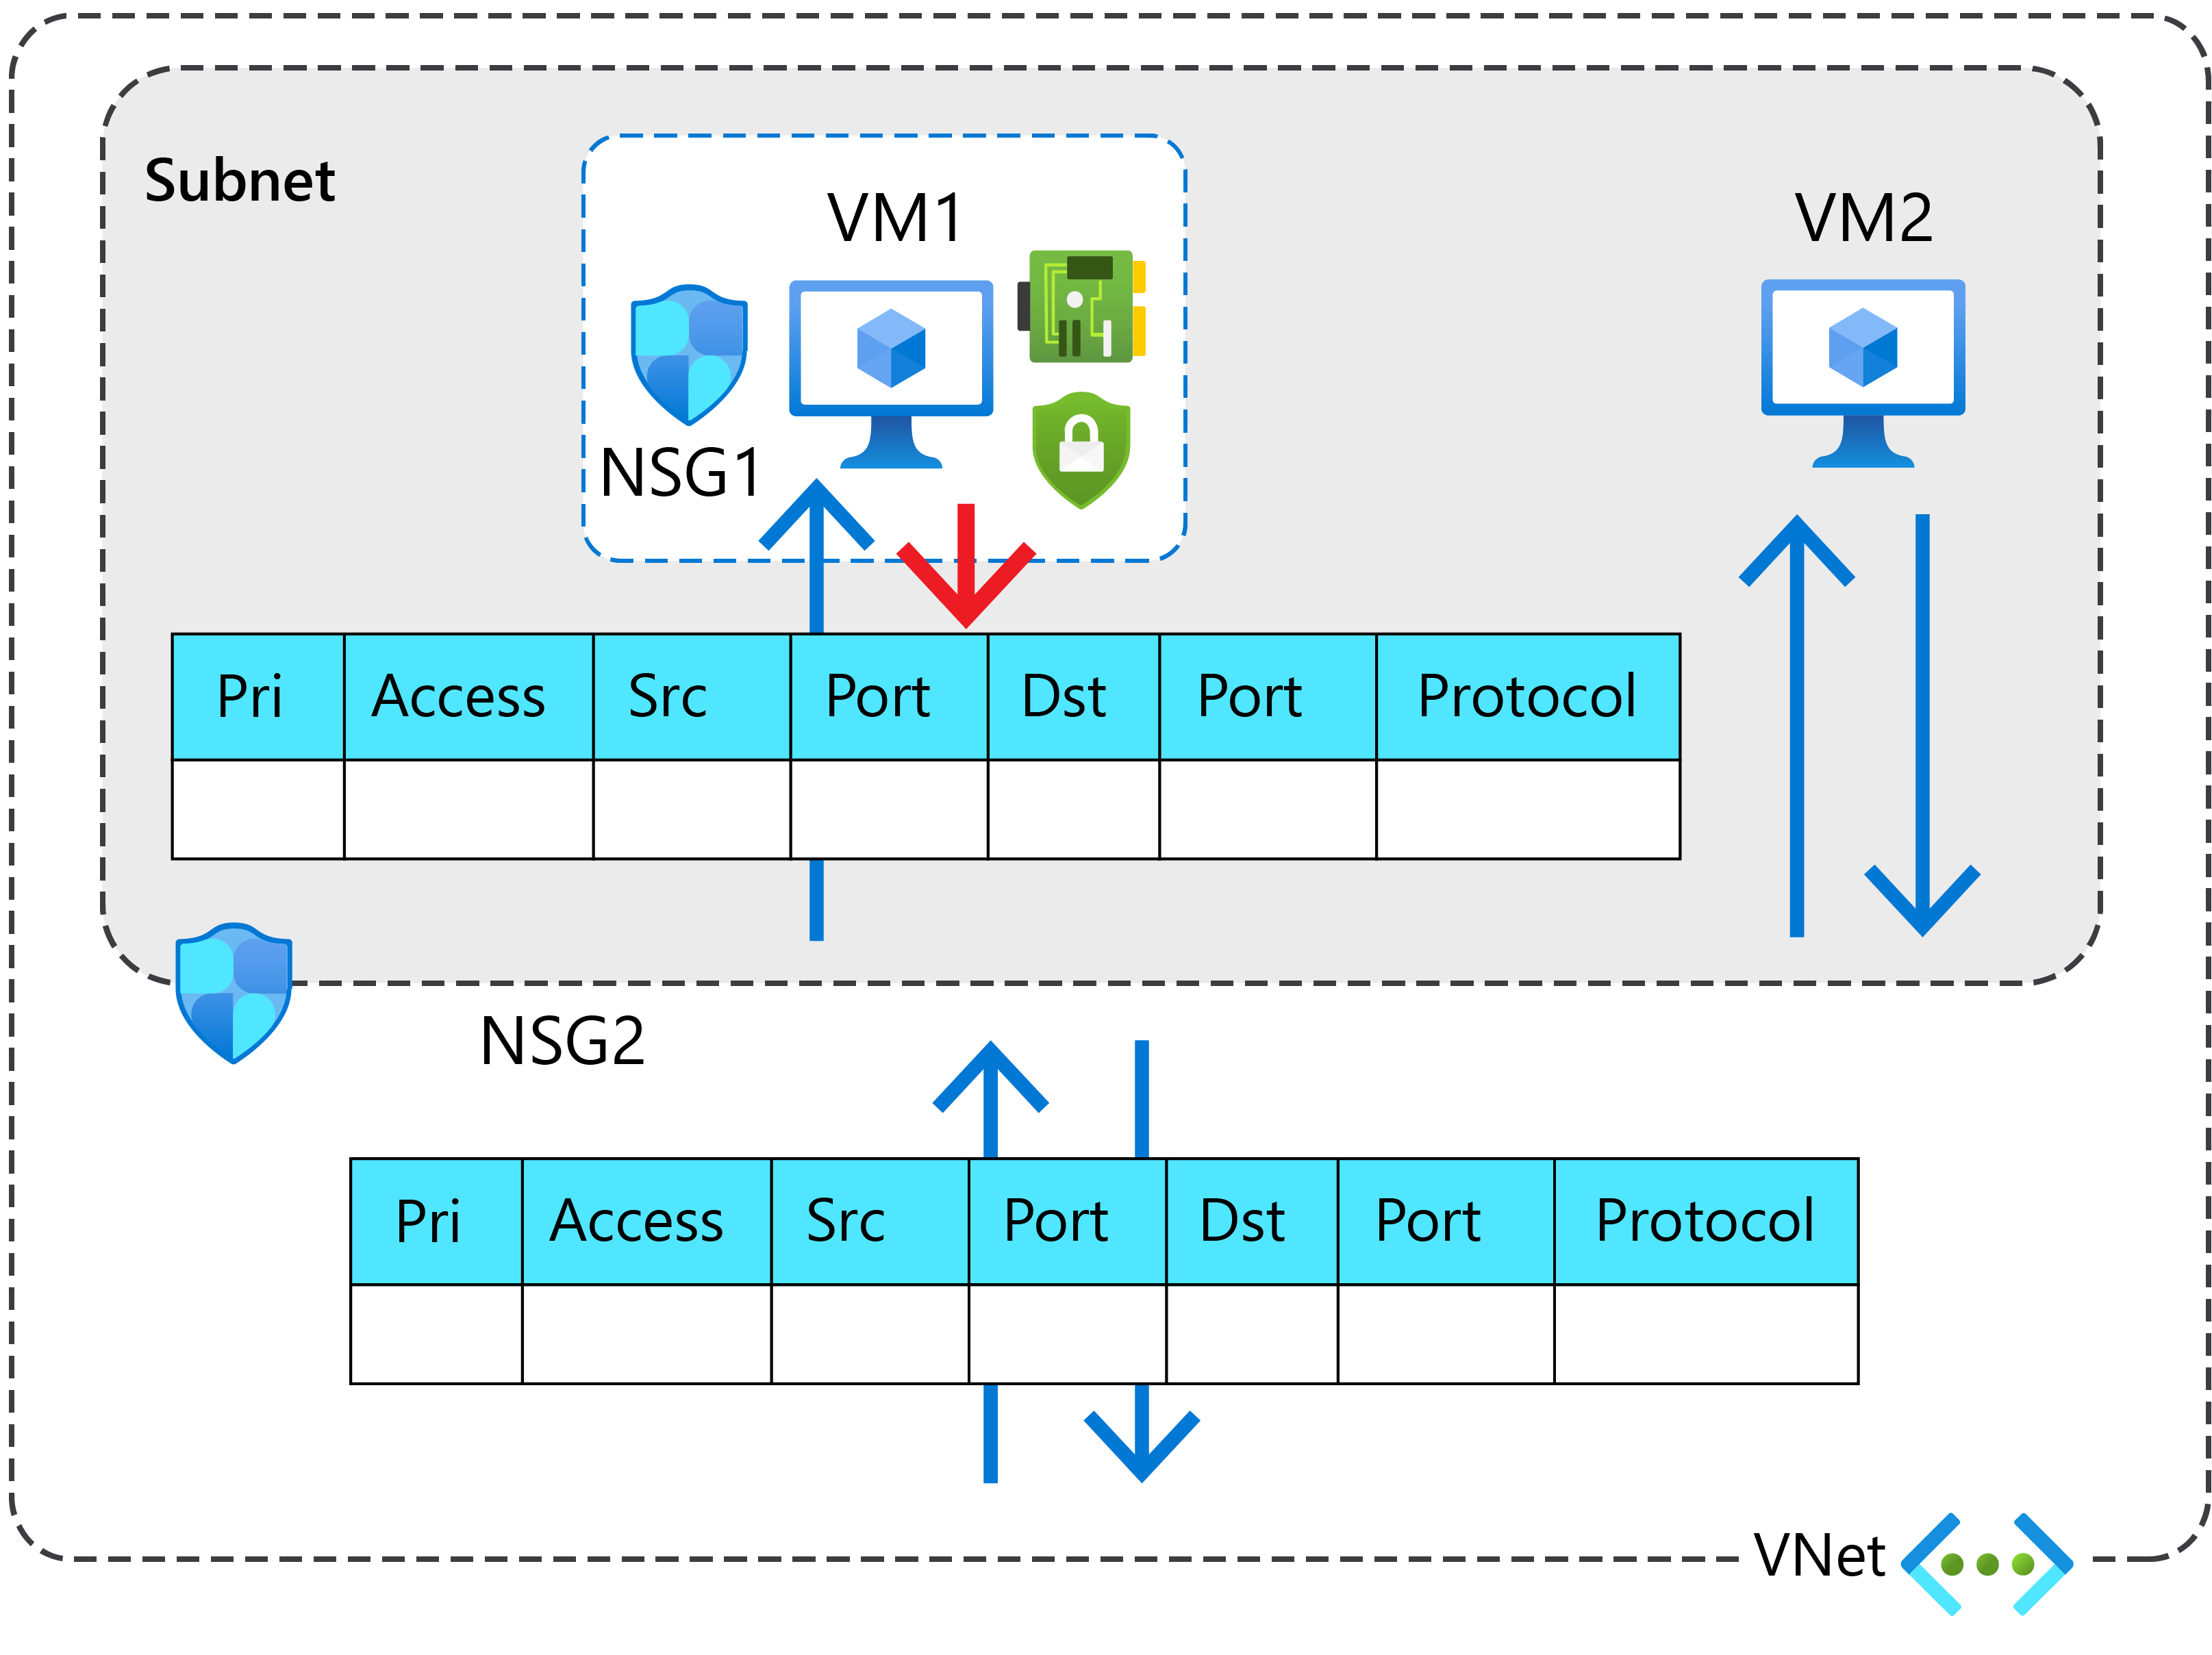 A subnet object contains two virtual machines: VM1 and VM2. VM1 is protected through the assignment of an NSG called NSG1. The entire subnet is protected by a network security group called NSG2.